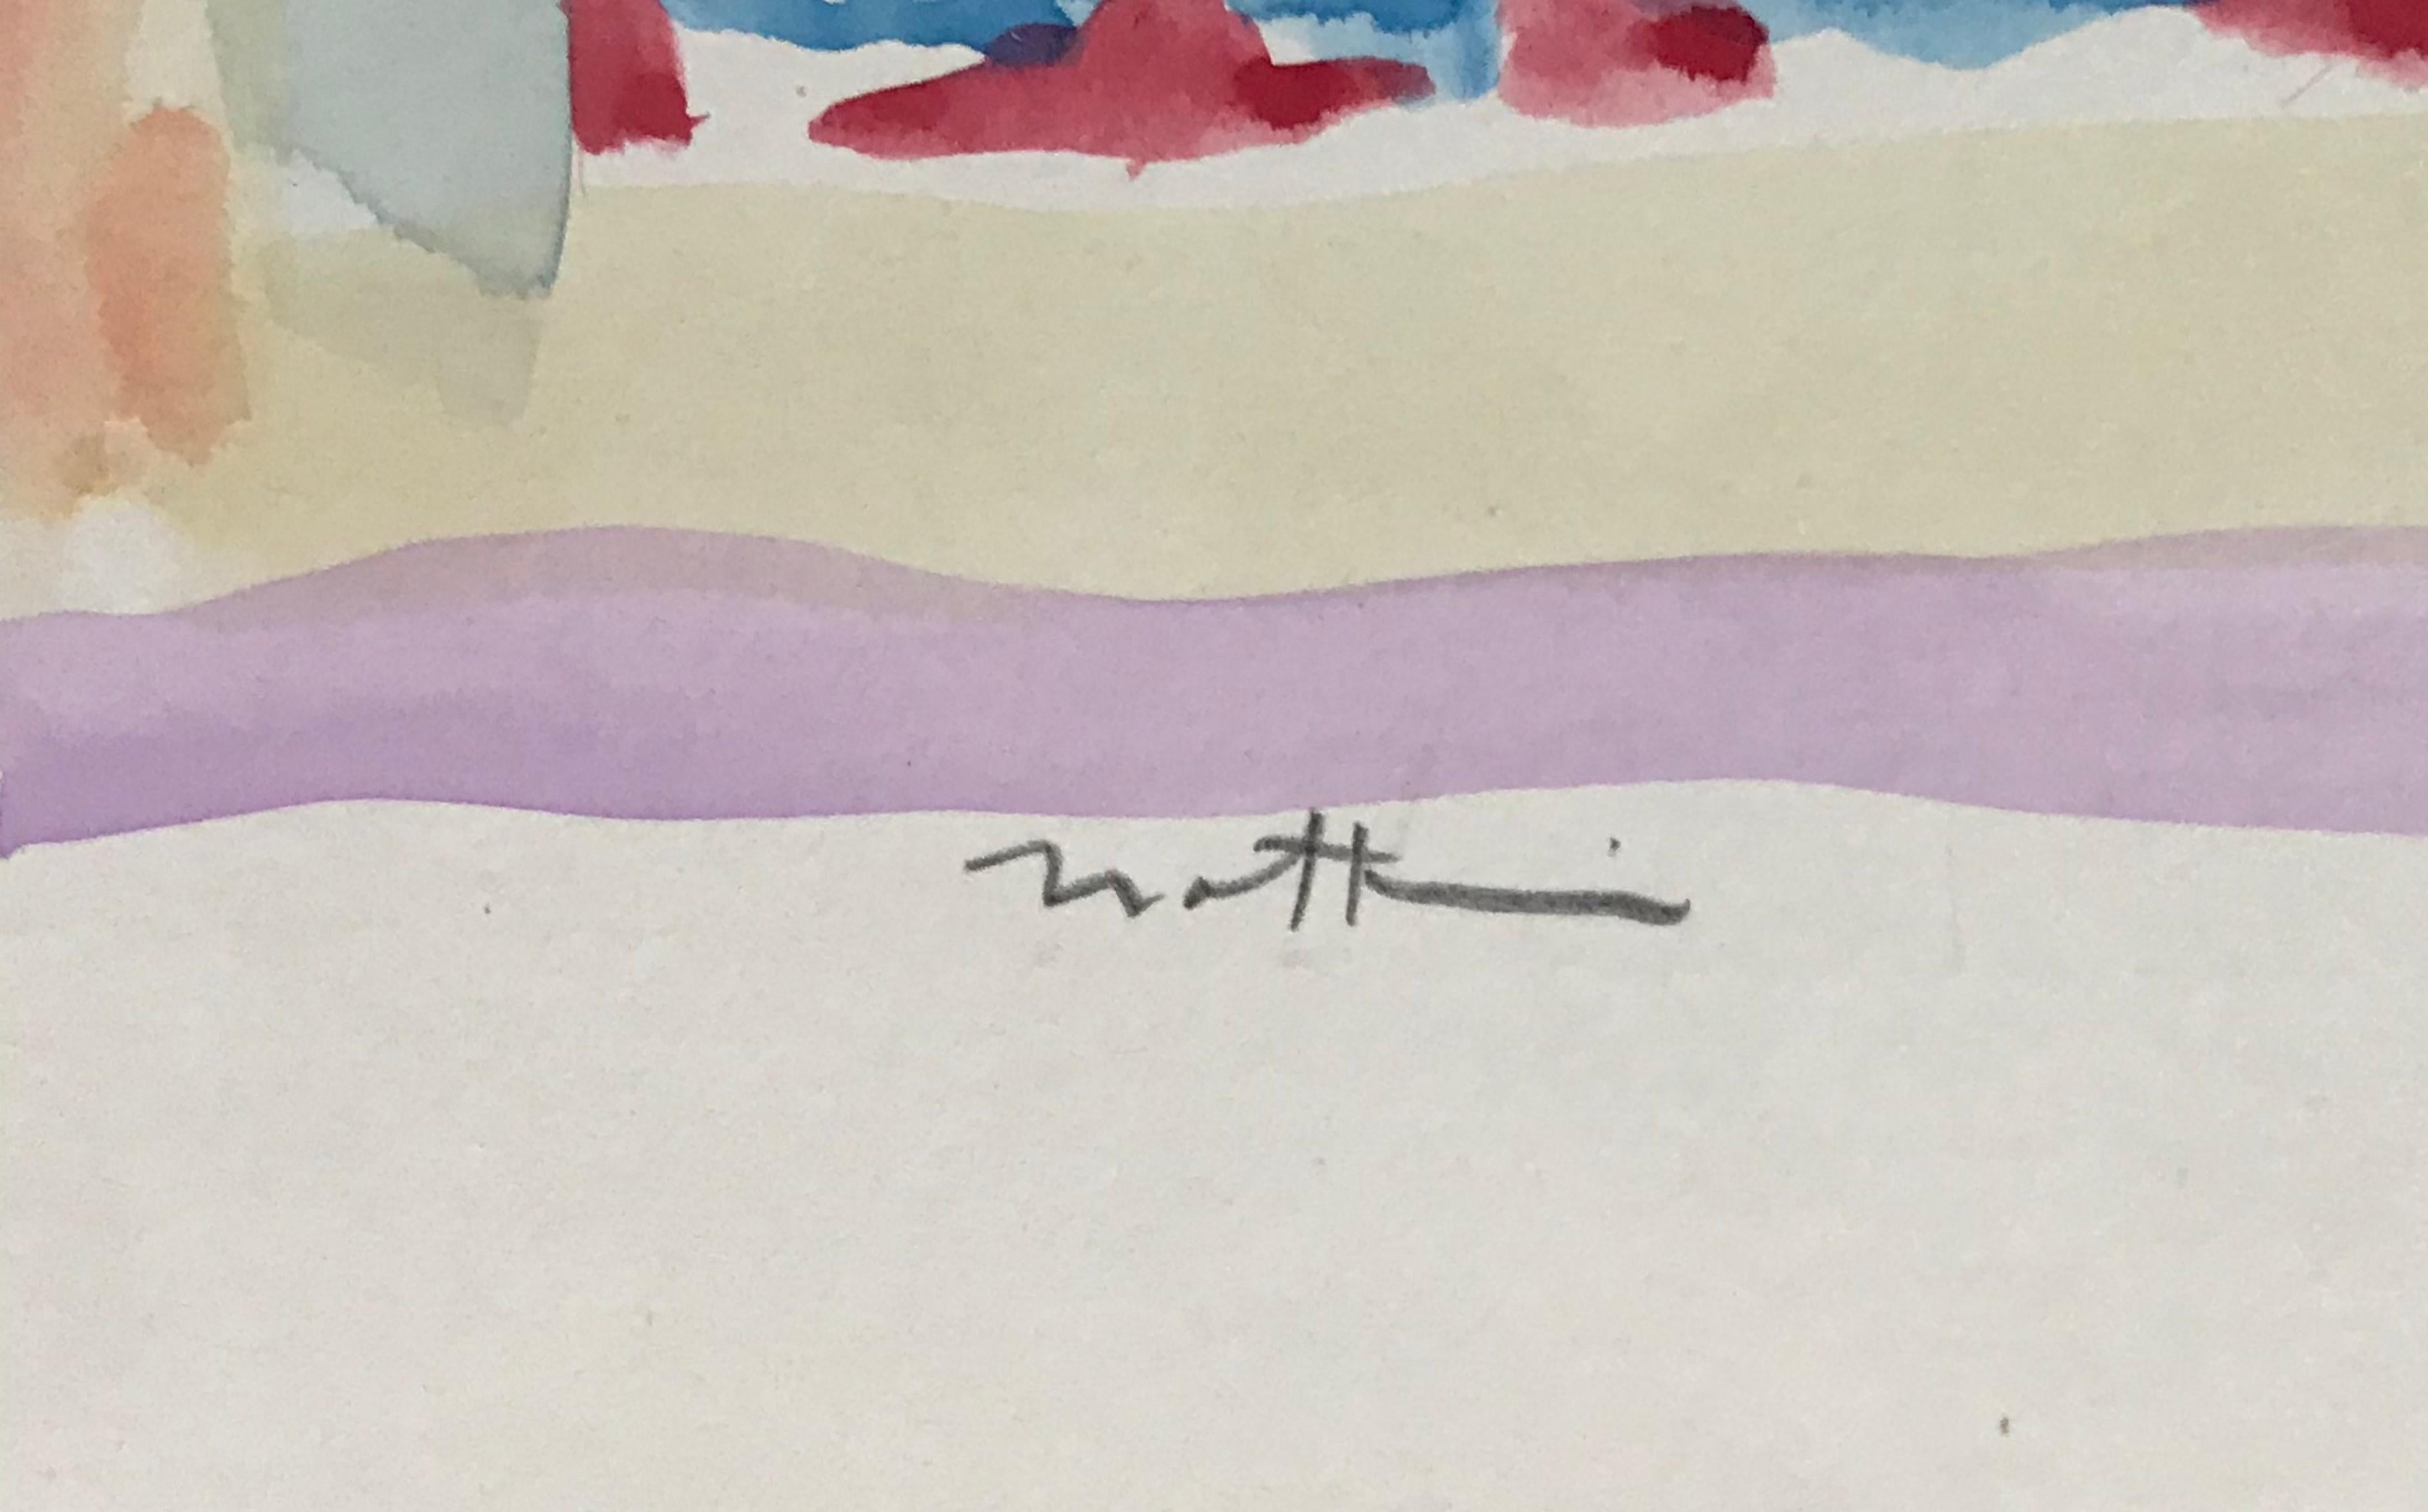 Robert Natkin
Untitled Abstract Expressionist work on paper, 1964
Watercolor on paper
Hand signed and dated 1964 by the artist on the front
19 1/4 × 14 1/4 inches
Unframed
Poignant Robert Natkin mid century modern watercolor painting on paper
Very